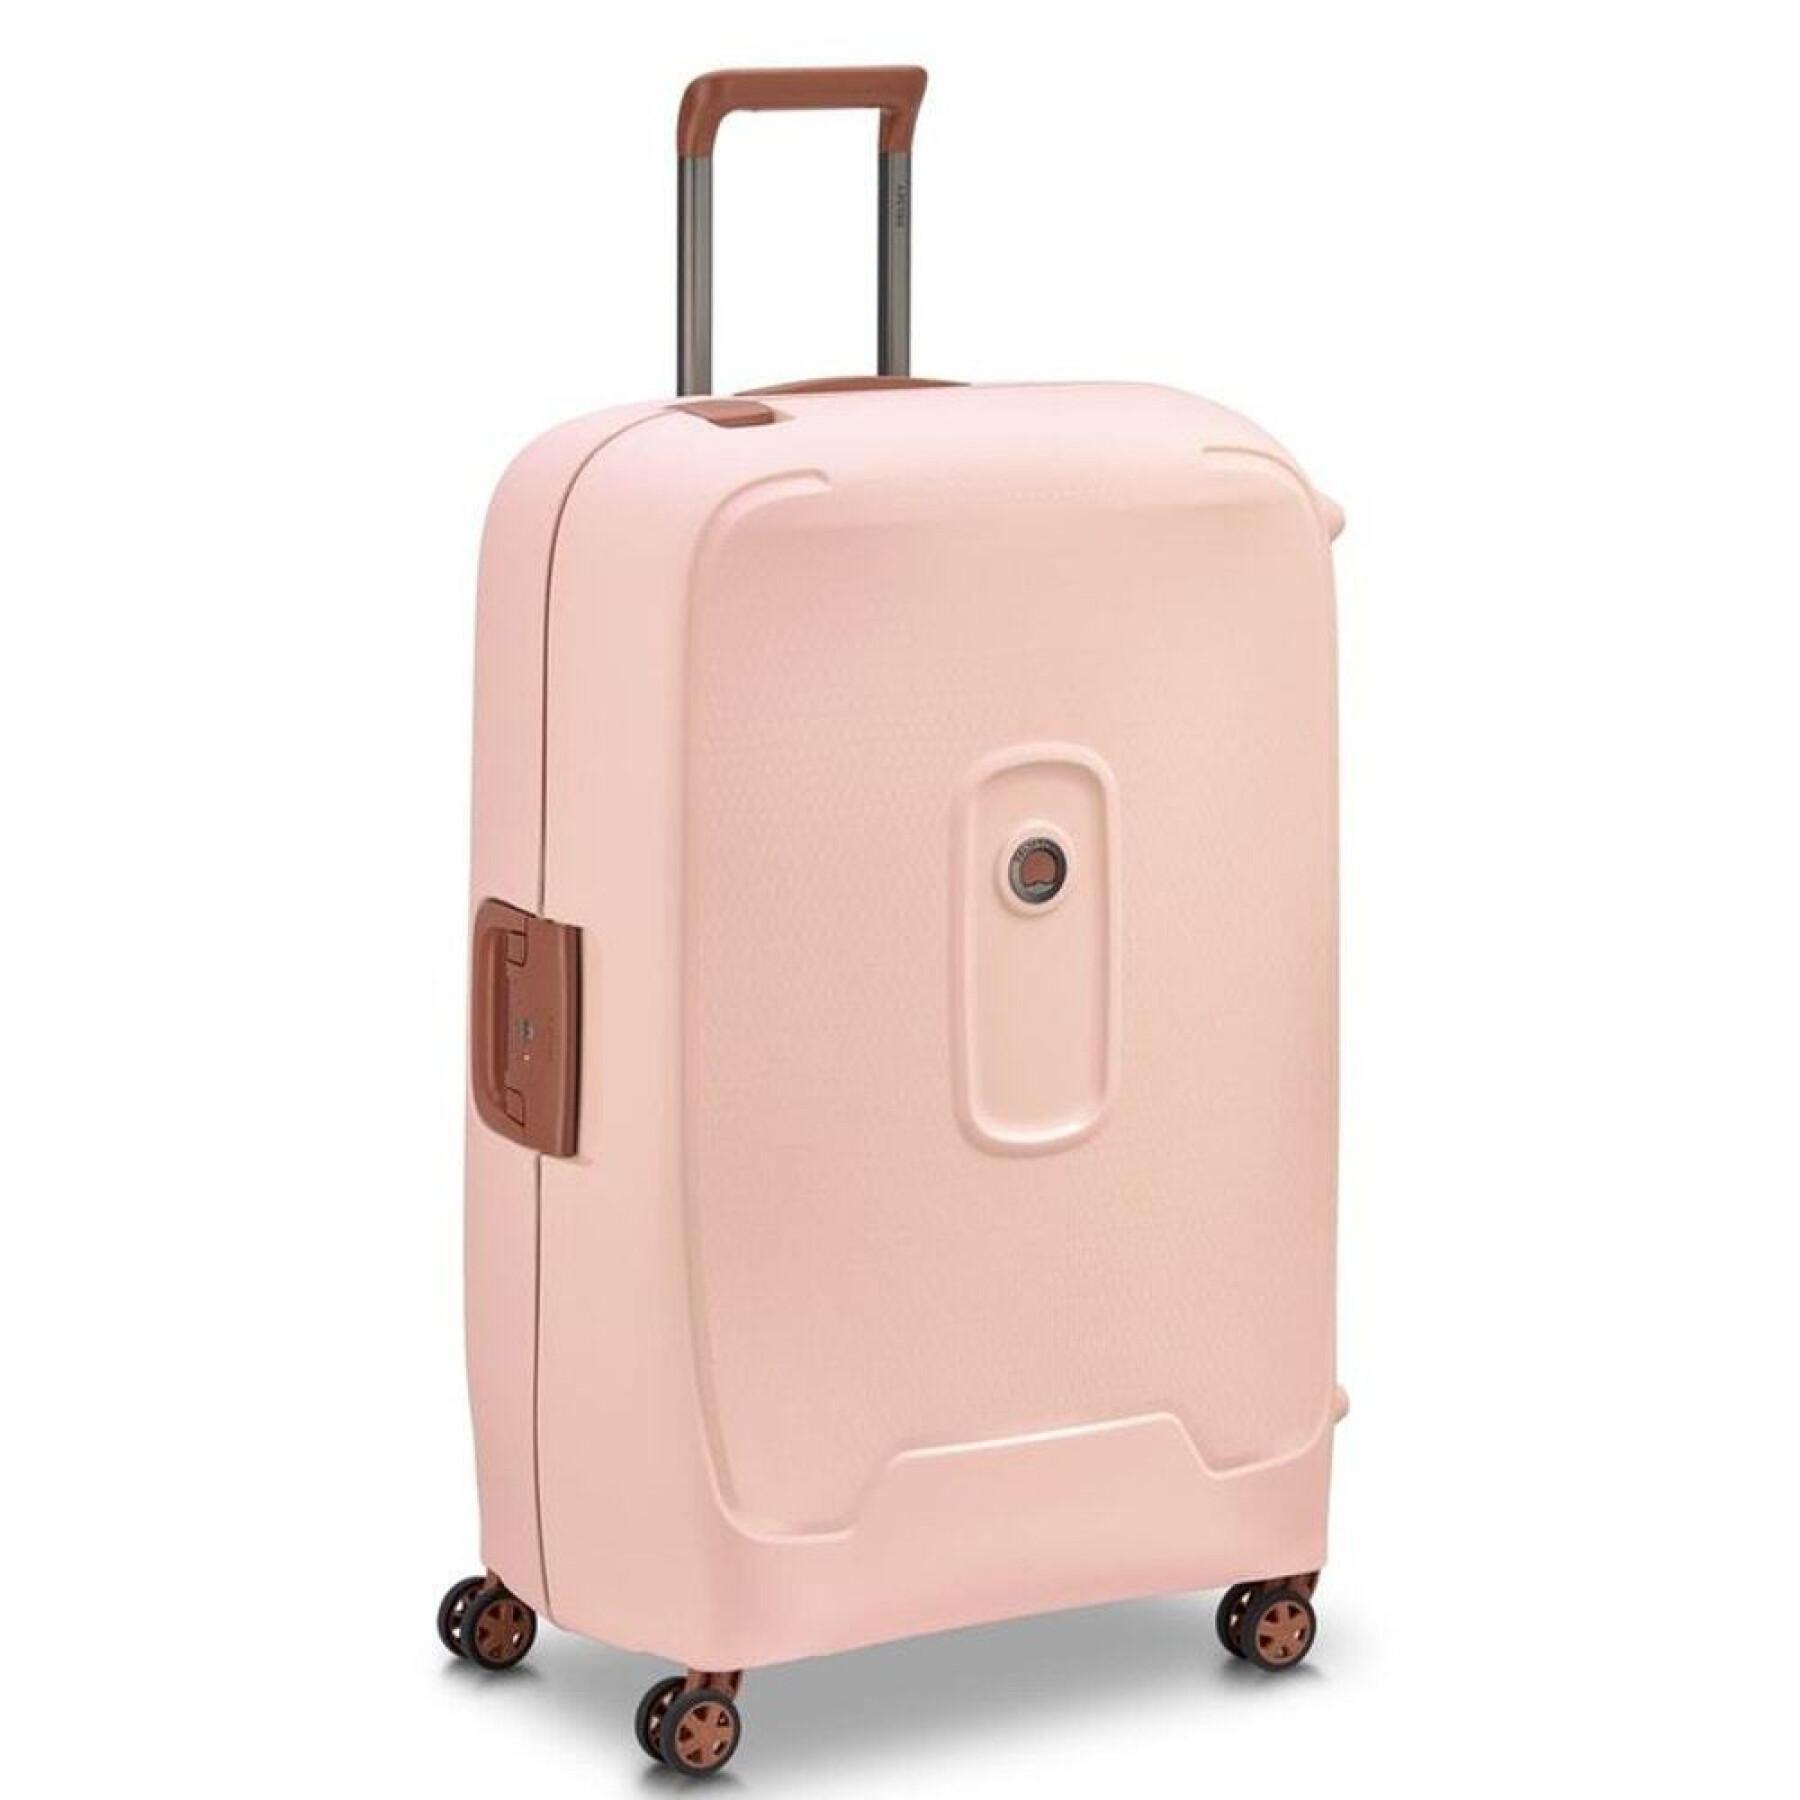 Trolley cabin suitcase 4 double wheels Delsey Moncey 76 cm